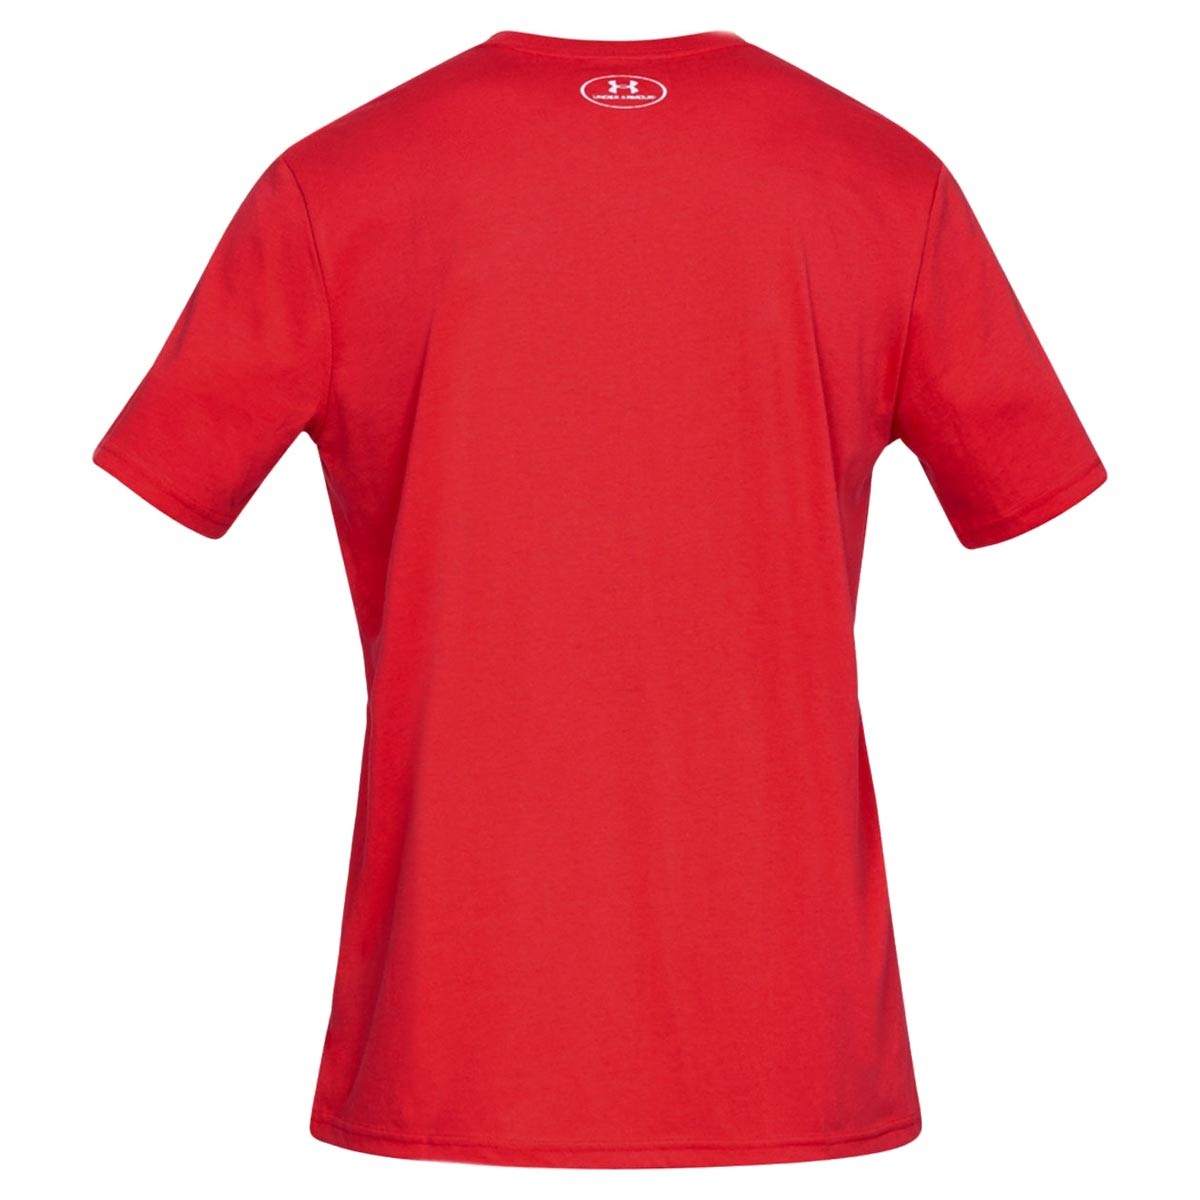 T-Shirts & Polo -  under armour Branded Big Logo Short Sleeve 9588